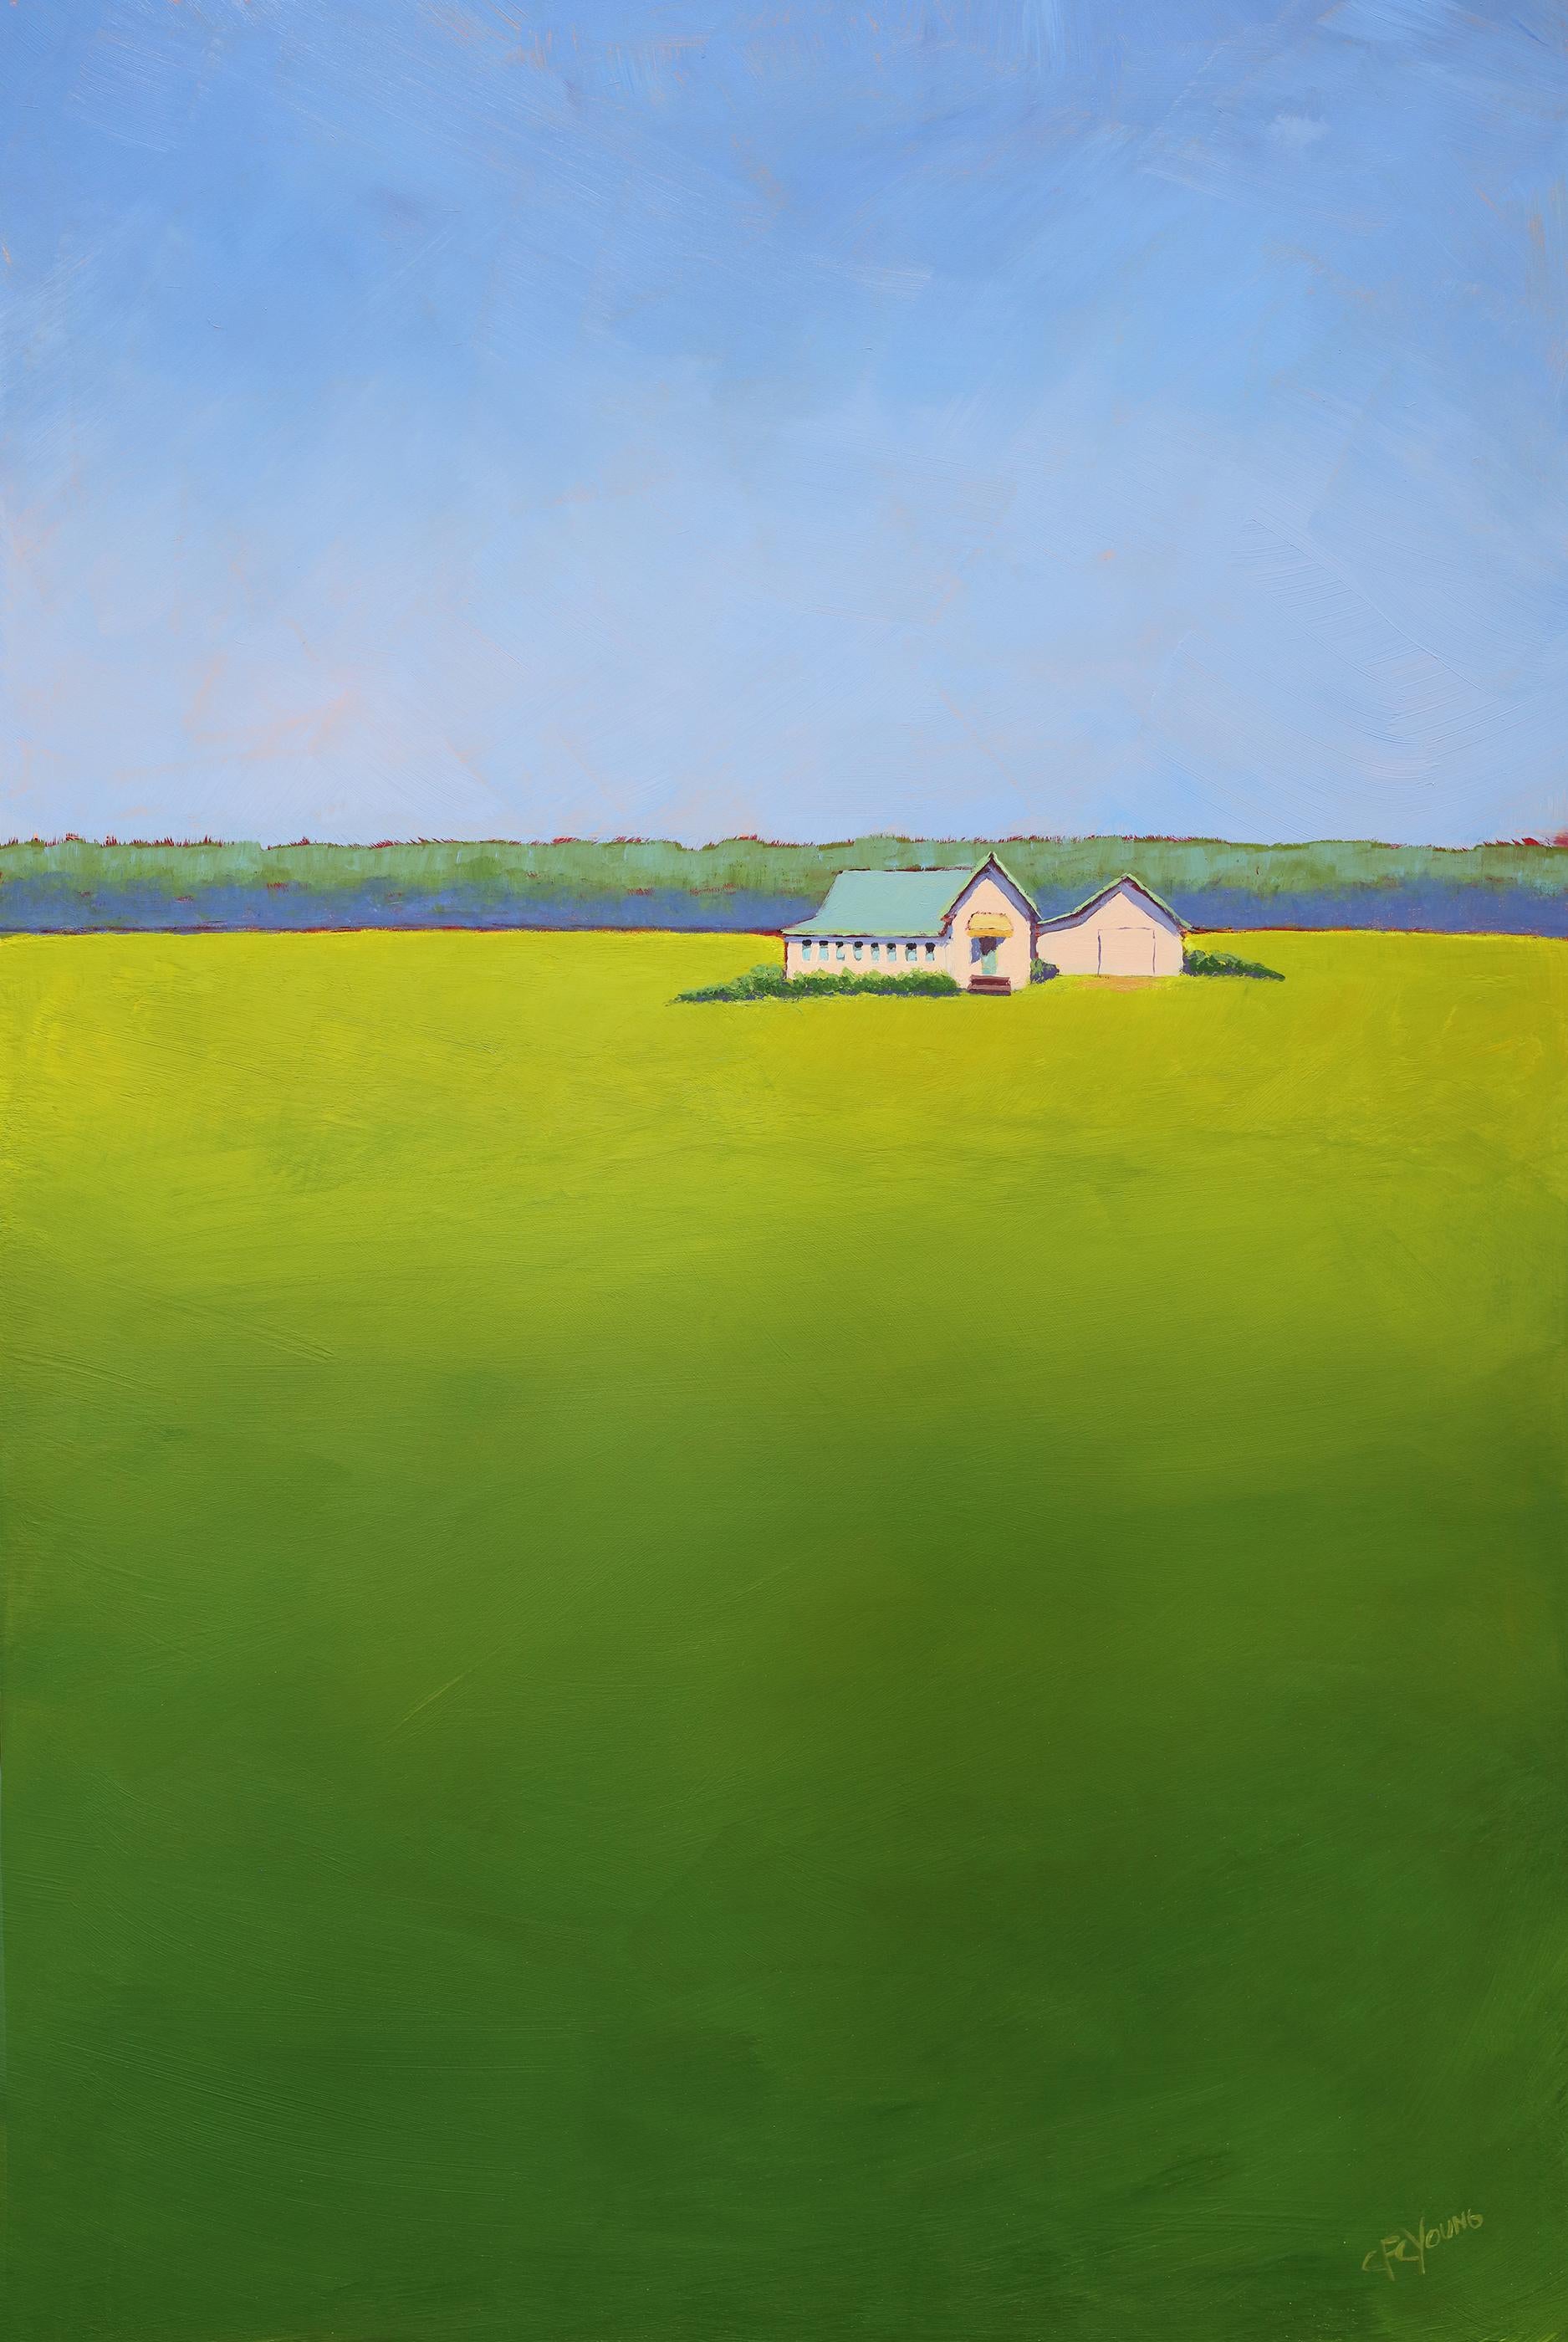 This colorful landscape painting by Carol Young features a vibrant green and blue palette, with a high horizon line, green foliage, and small barns. Above and below it are colorful expanses of ground and sky. The painting is made on panel, and has